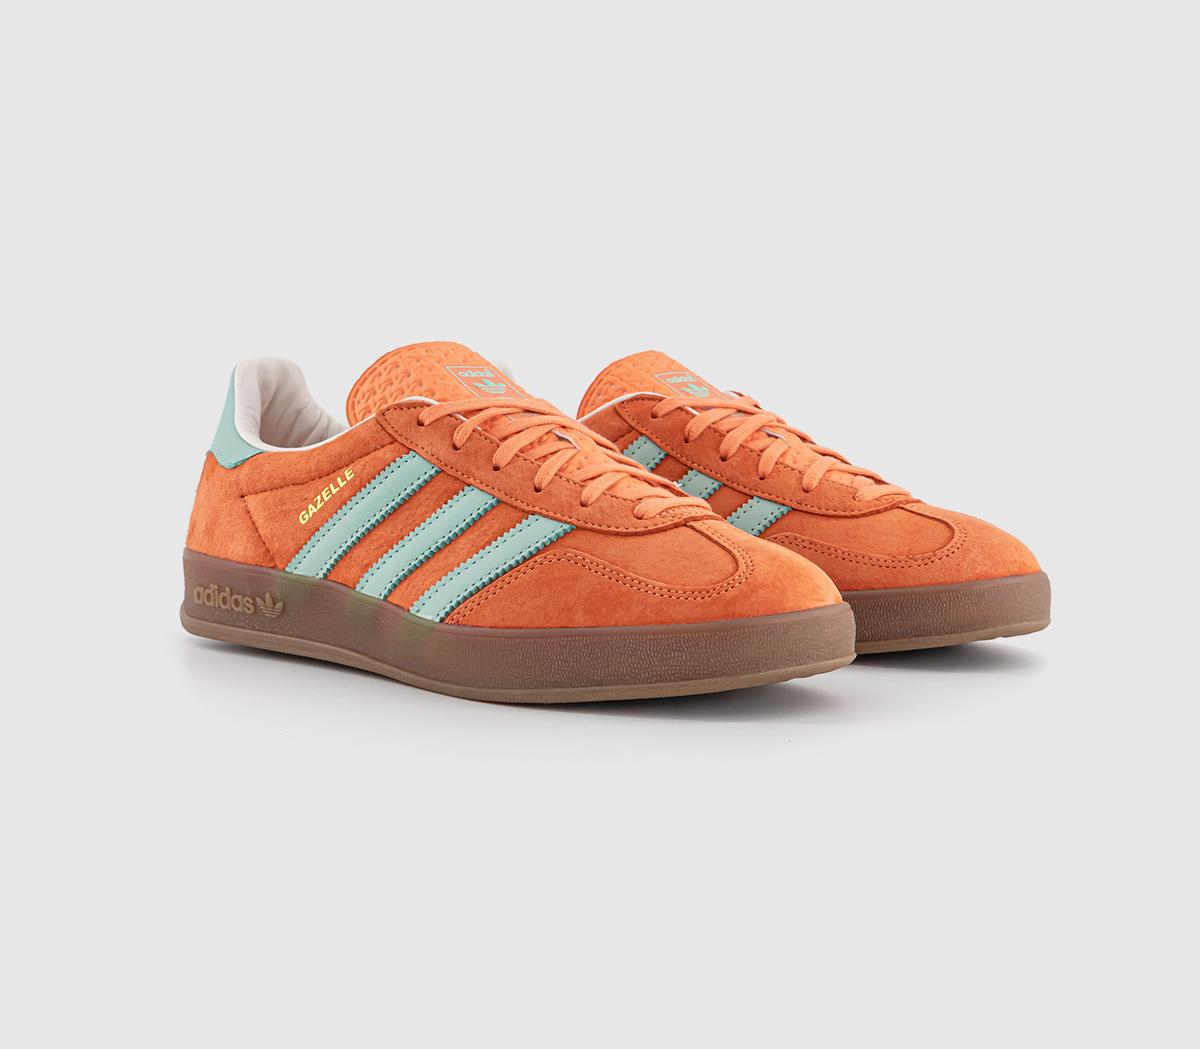 Adidas Gazelle Indoor Trainers Easy Orange Clear Mint Gum Red, 5.5